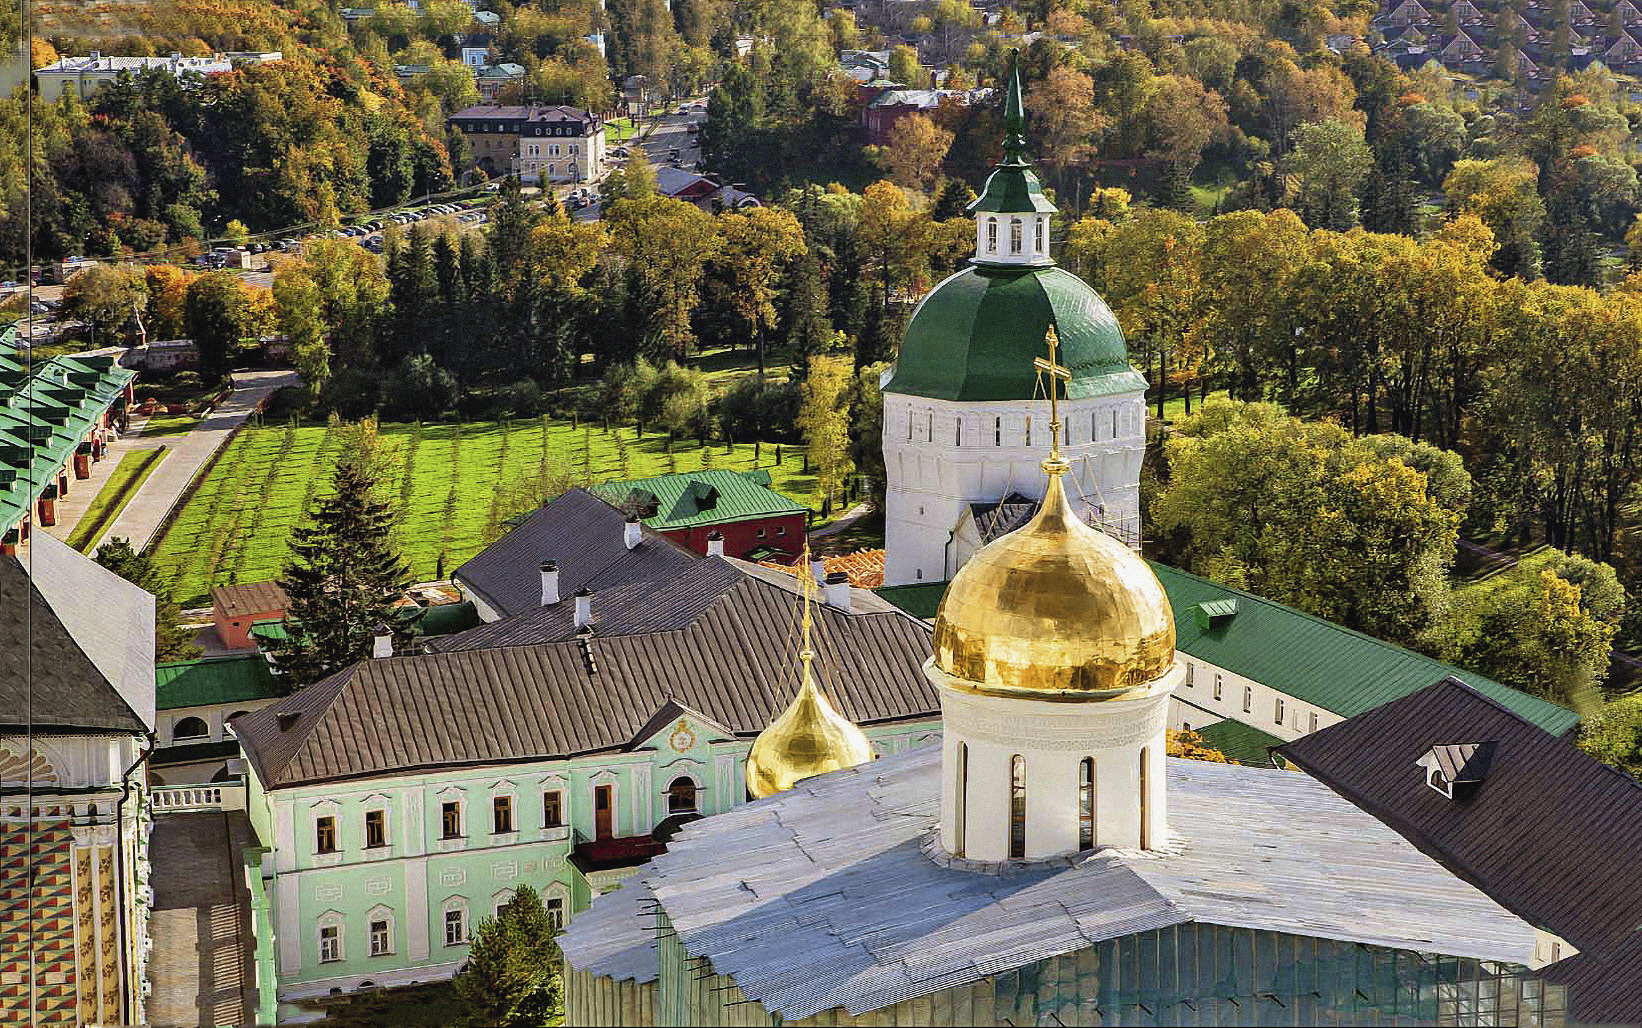 The Trinity Lavra was founded by St. Sergius of Radonezh in the 14th century, and grew to form a whole complex of churches, towers, monks’ cells, workshops, and hotels.